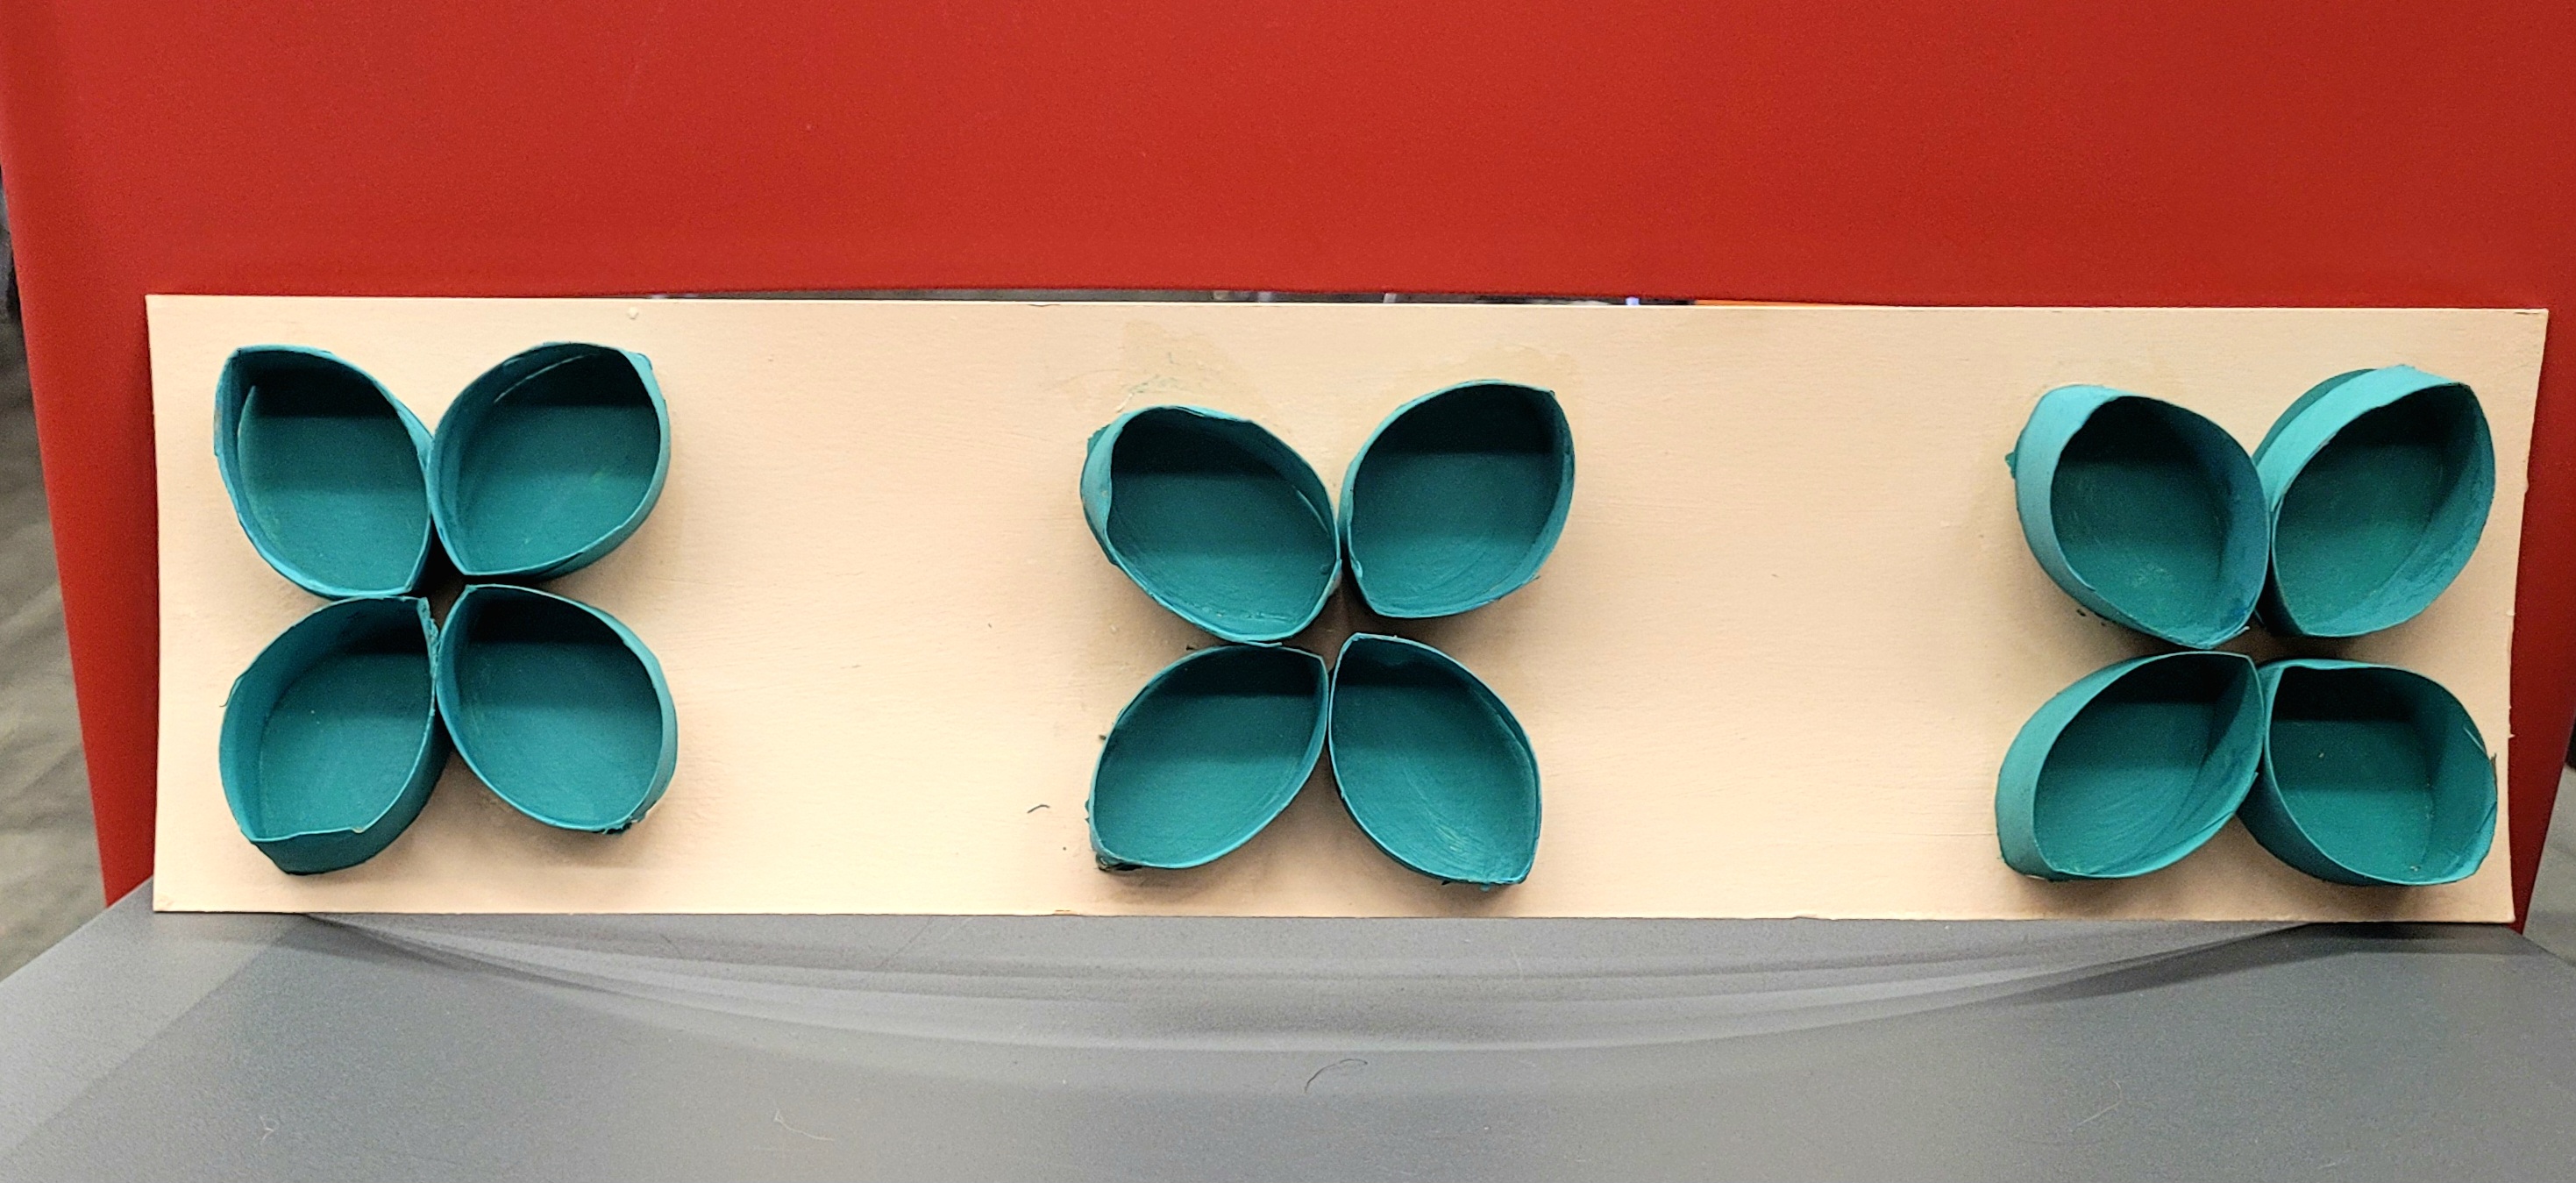 blue/green painted cardboard roll pieces in a flower pattern on a cream, rectangle backing.